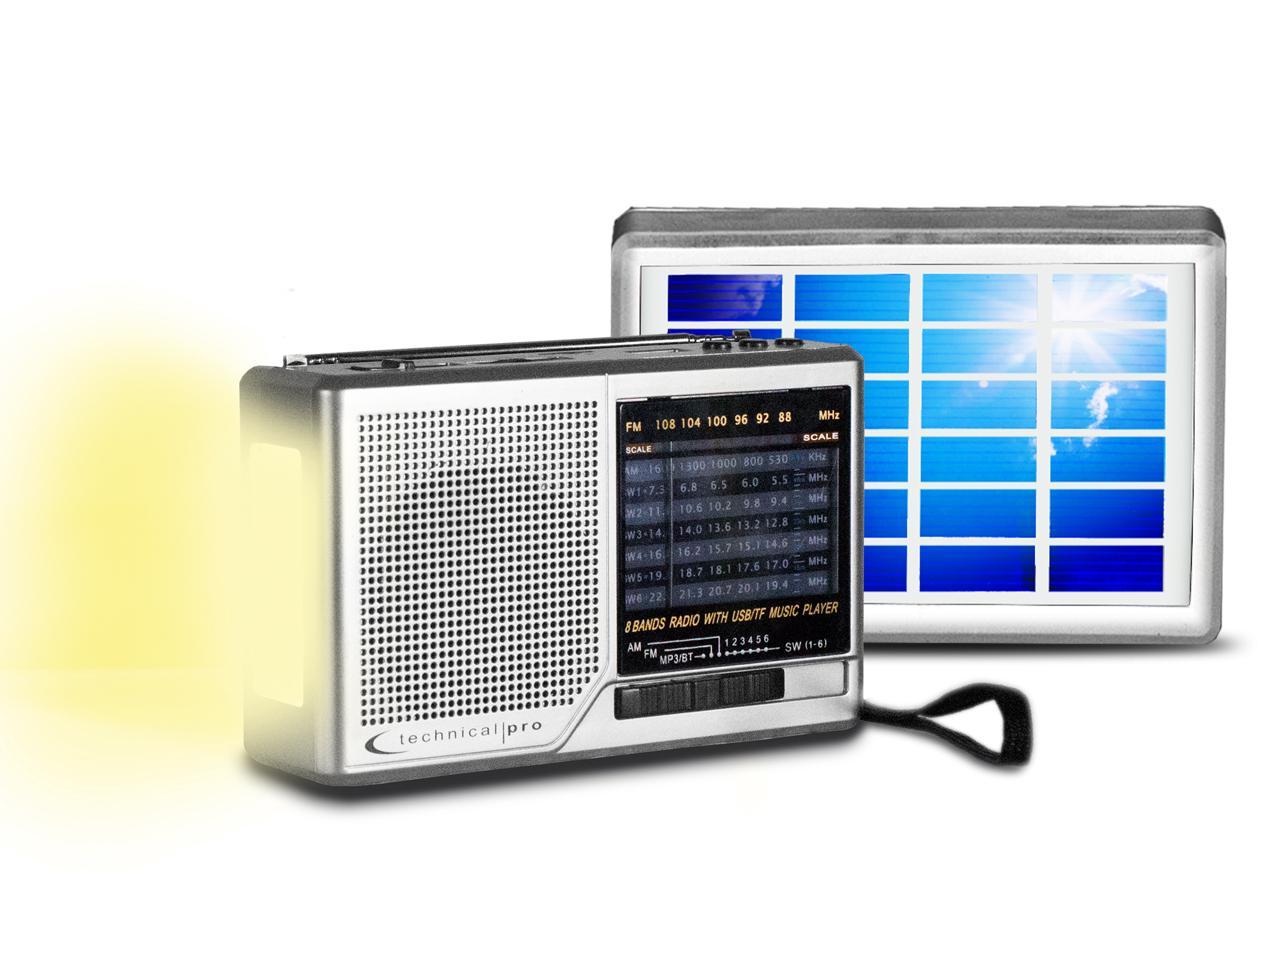 New Technical Pro Handheld Shortwave Solar Powered Am Fm Radio Speaker With Headphone Output The Ultimate Radio For Anyone On The Go Newegg Com